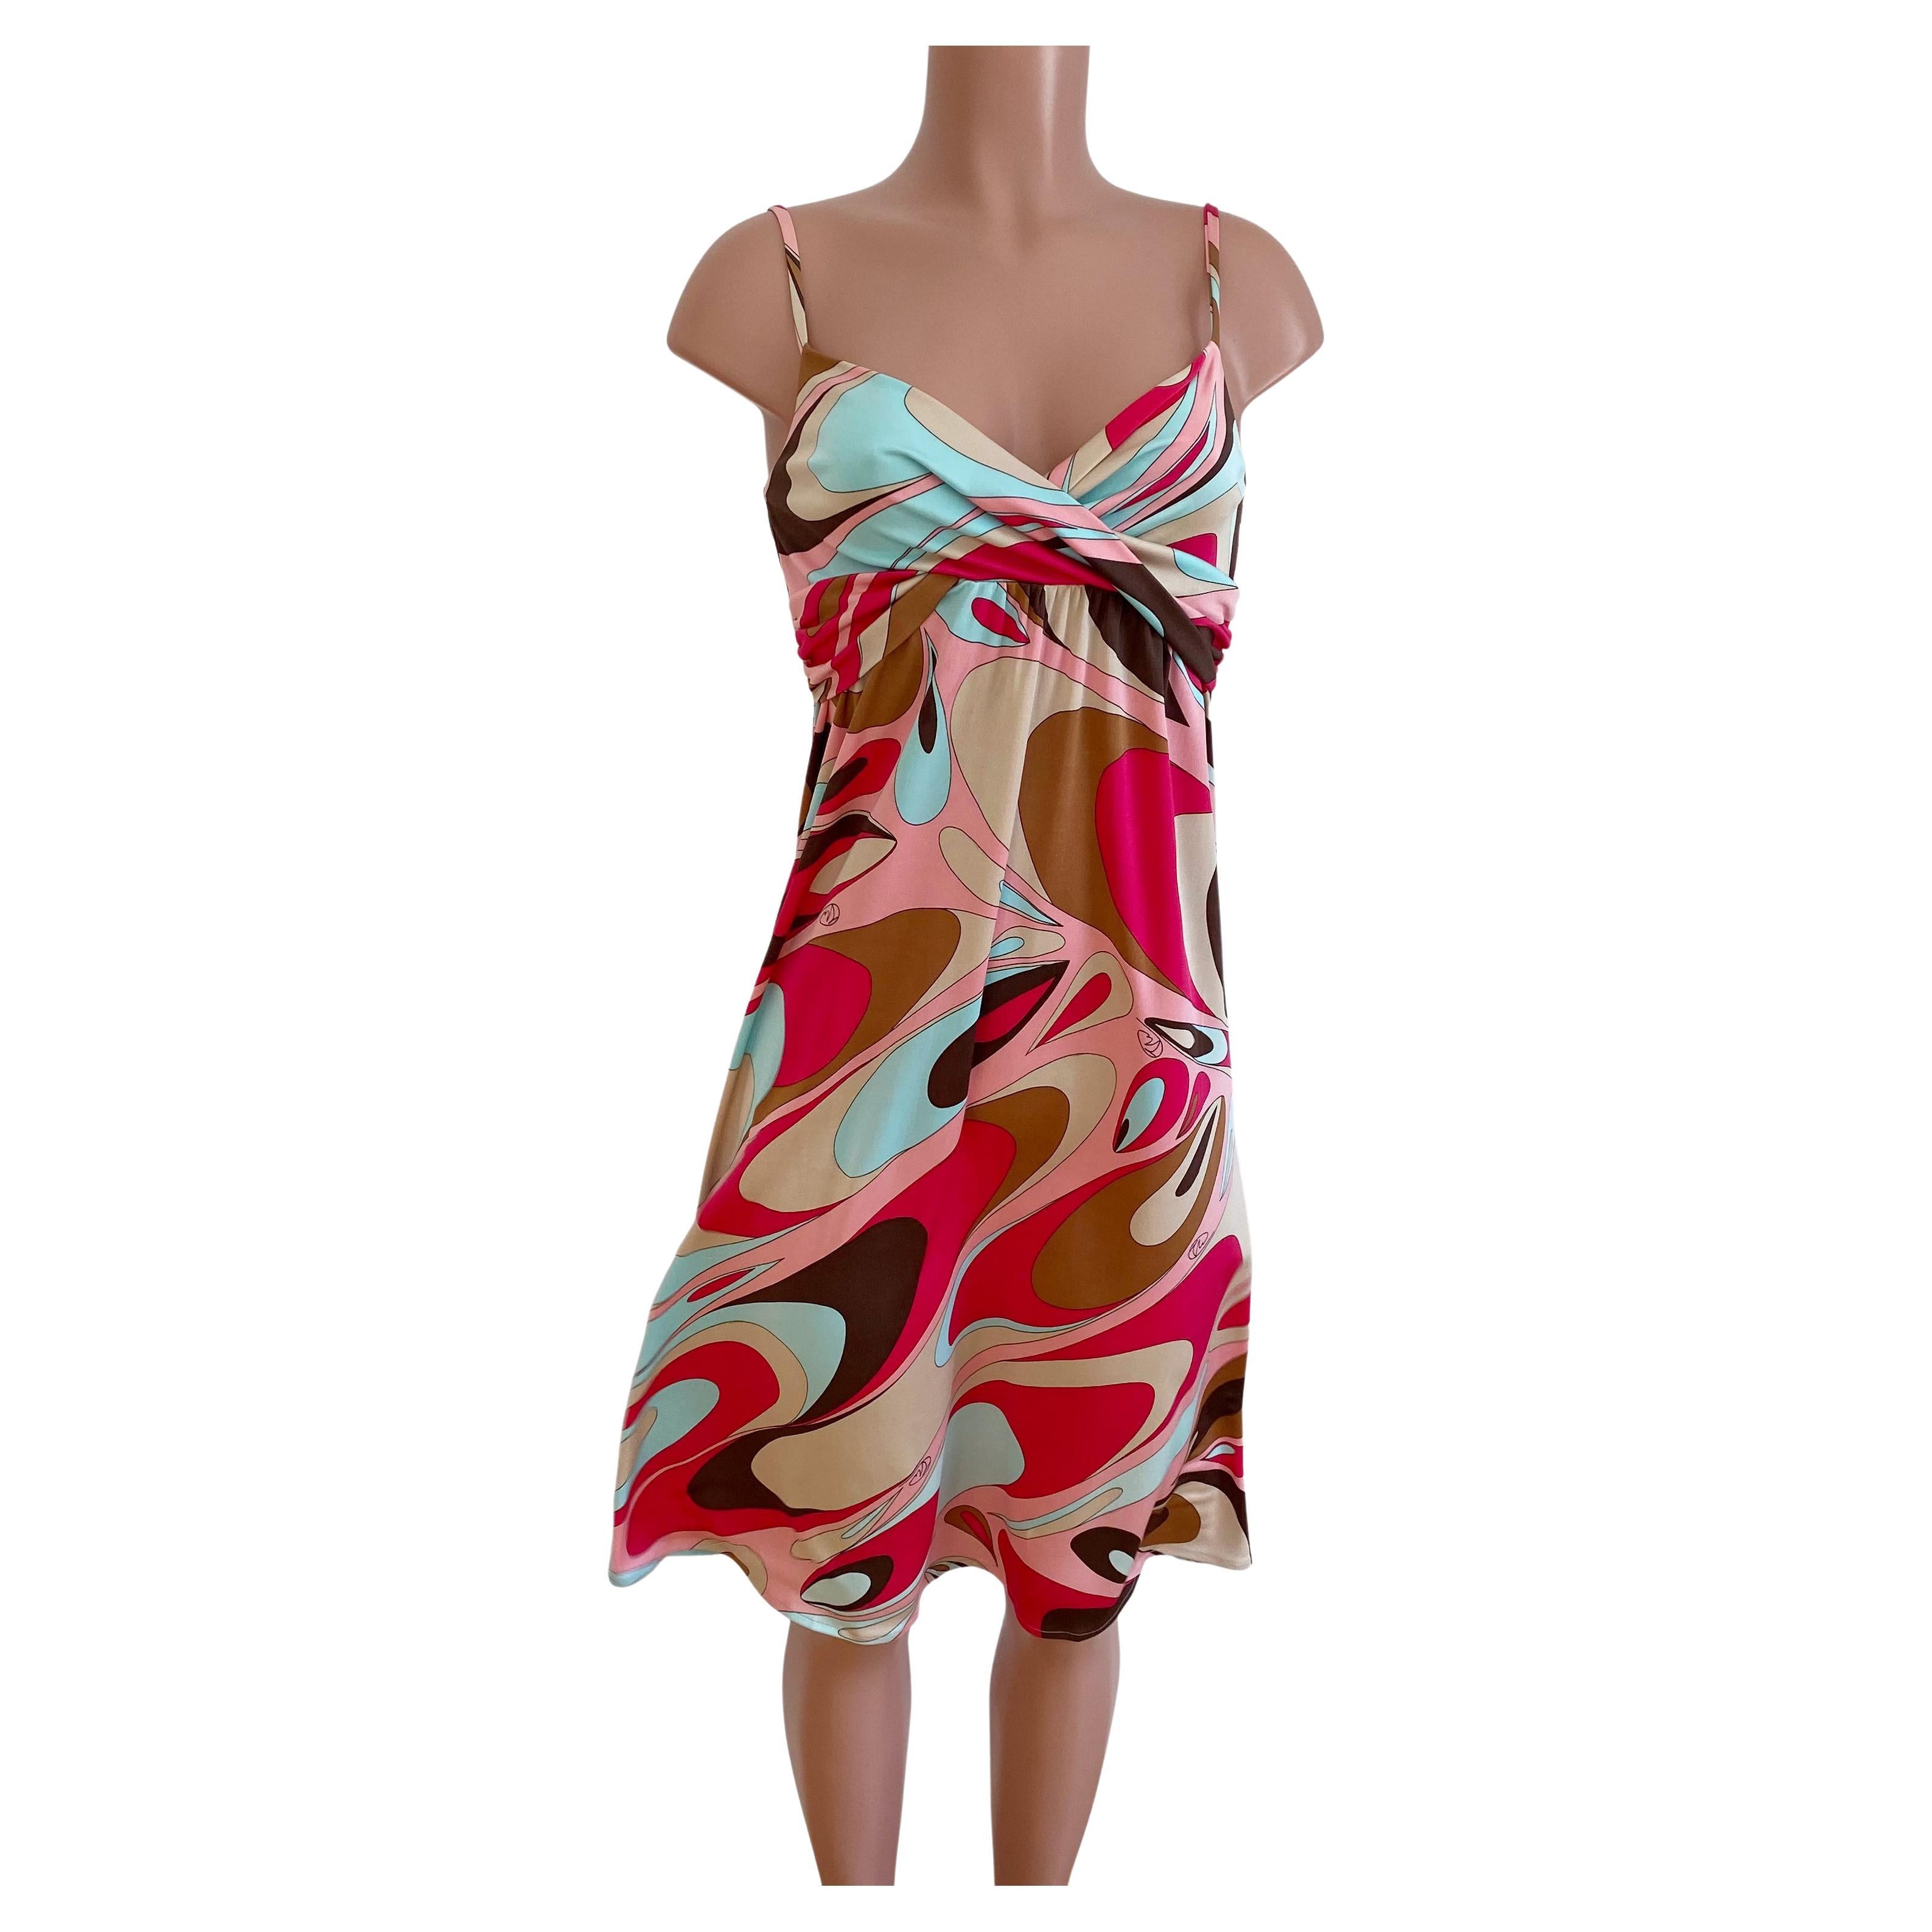 Twist front slip dress with adjustable shoulder straps for a perfect, flattering fit.
Gelato swirl print in pink, mocha and mint.
Approximately 45